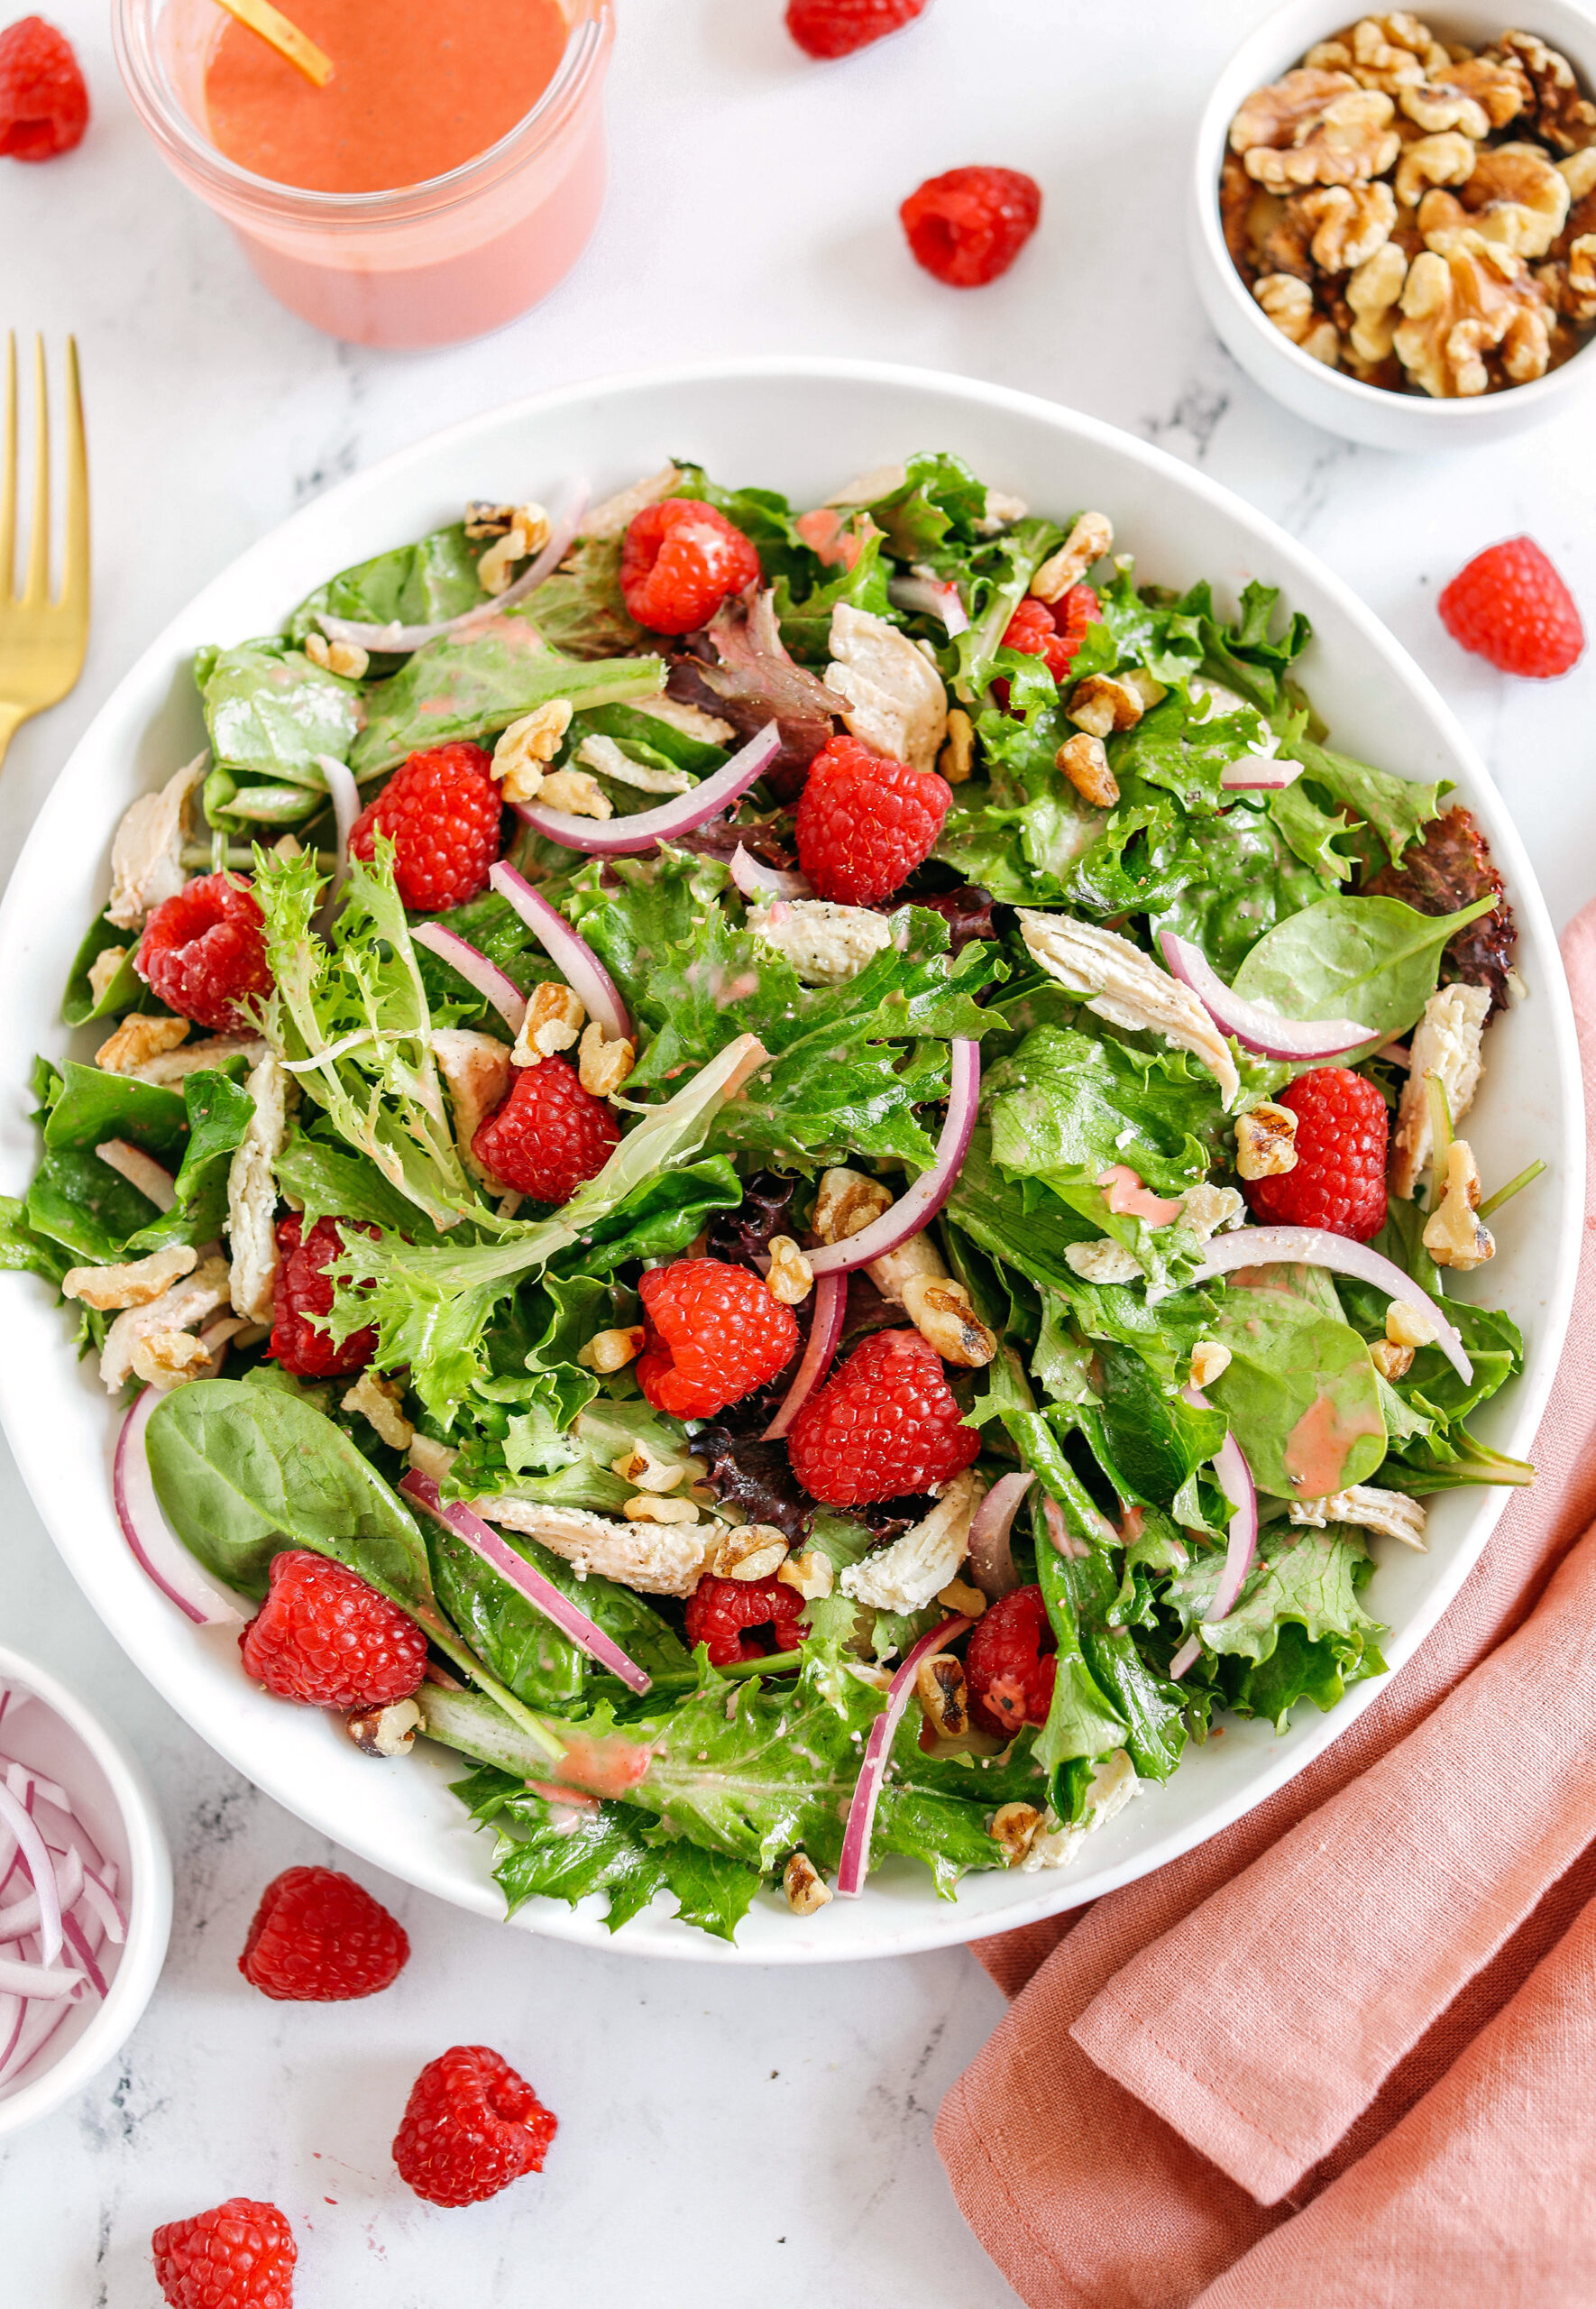 My favorite Raspberry Walnut Salad with Chicken made with leafy greens, fresh raspberries, shredded chicken, chopped walnuts, and sliced red onion all tossed with a creamy raspberry vinaigrette!